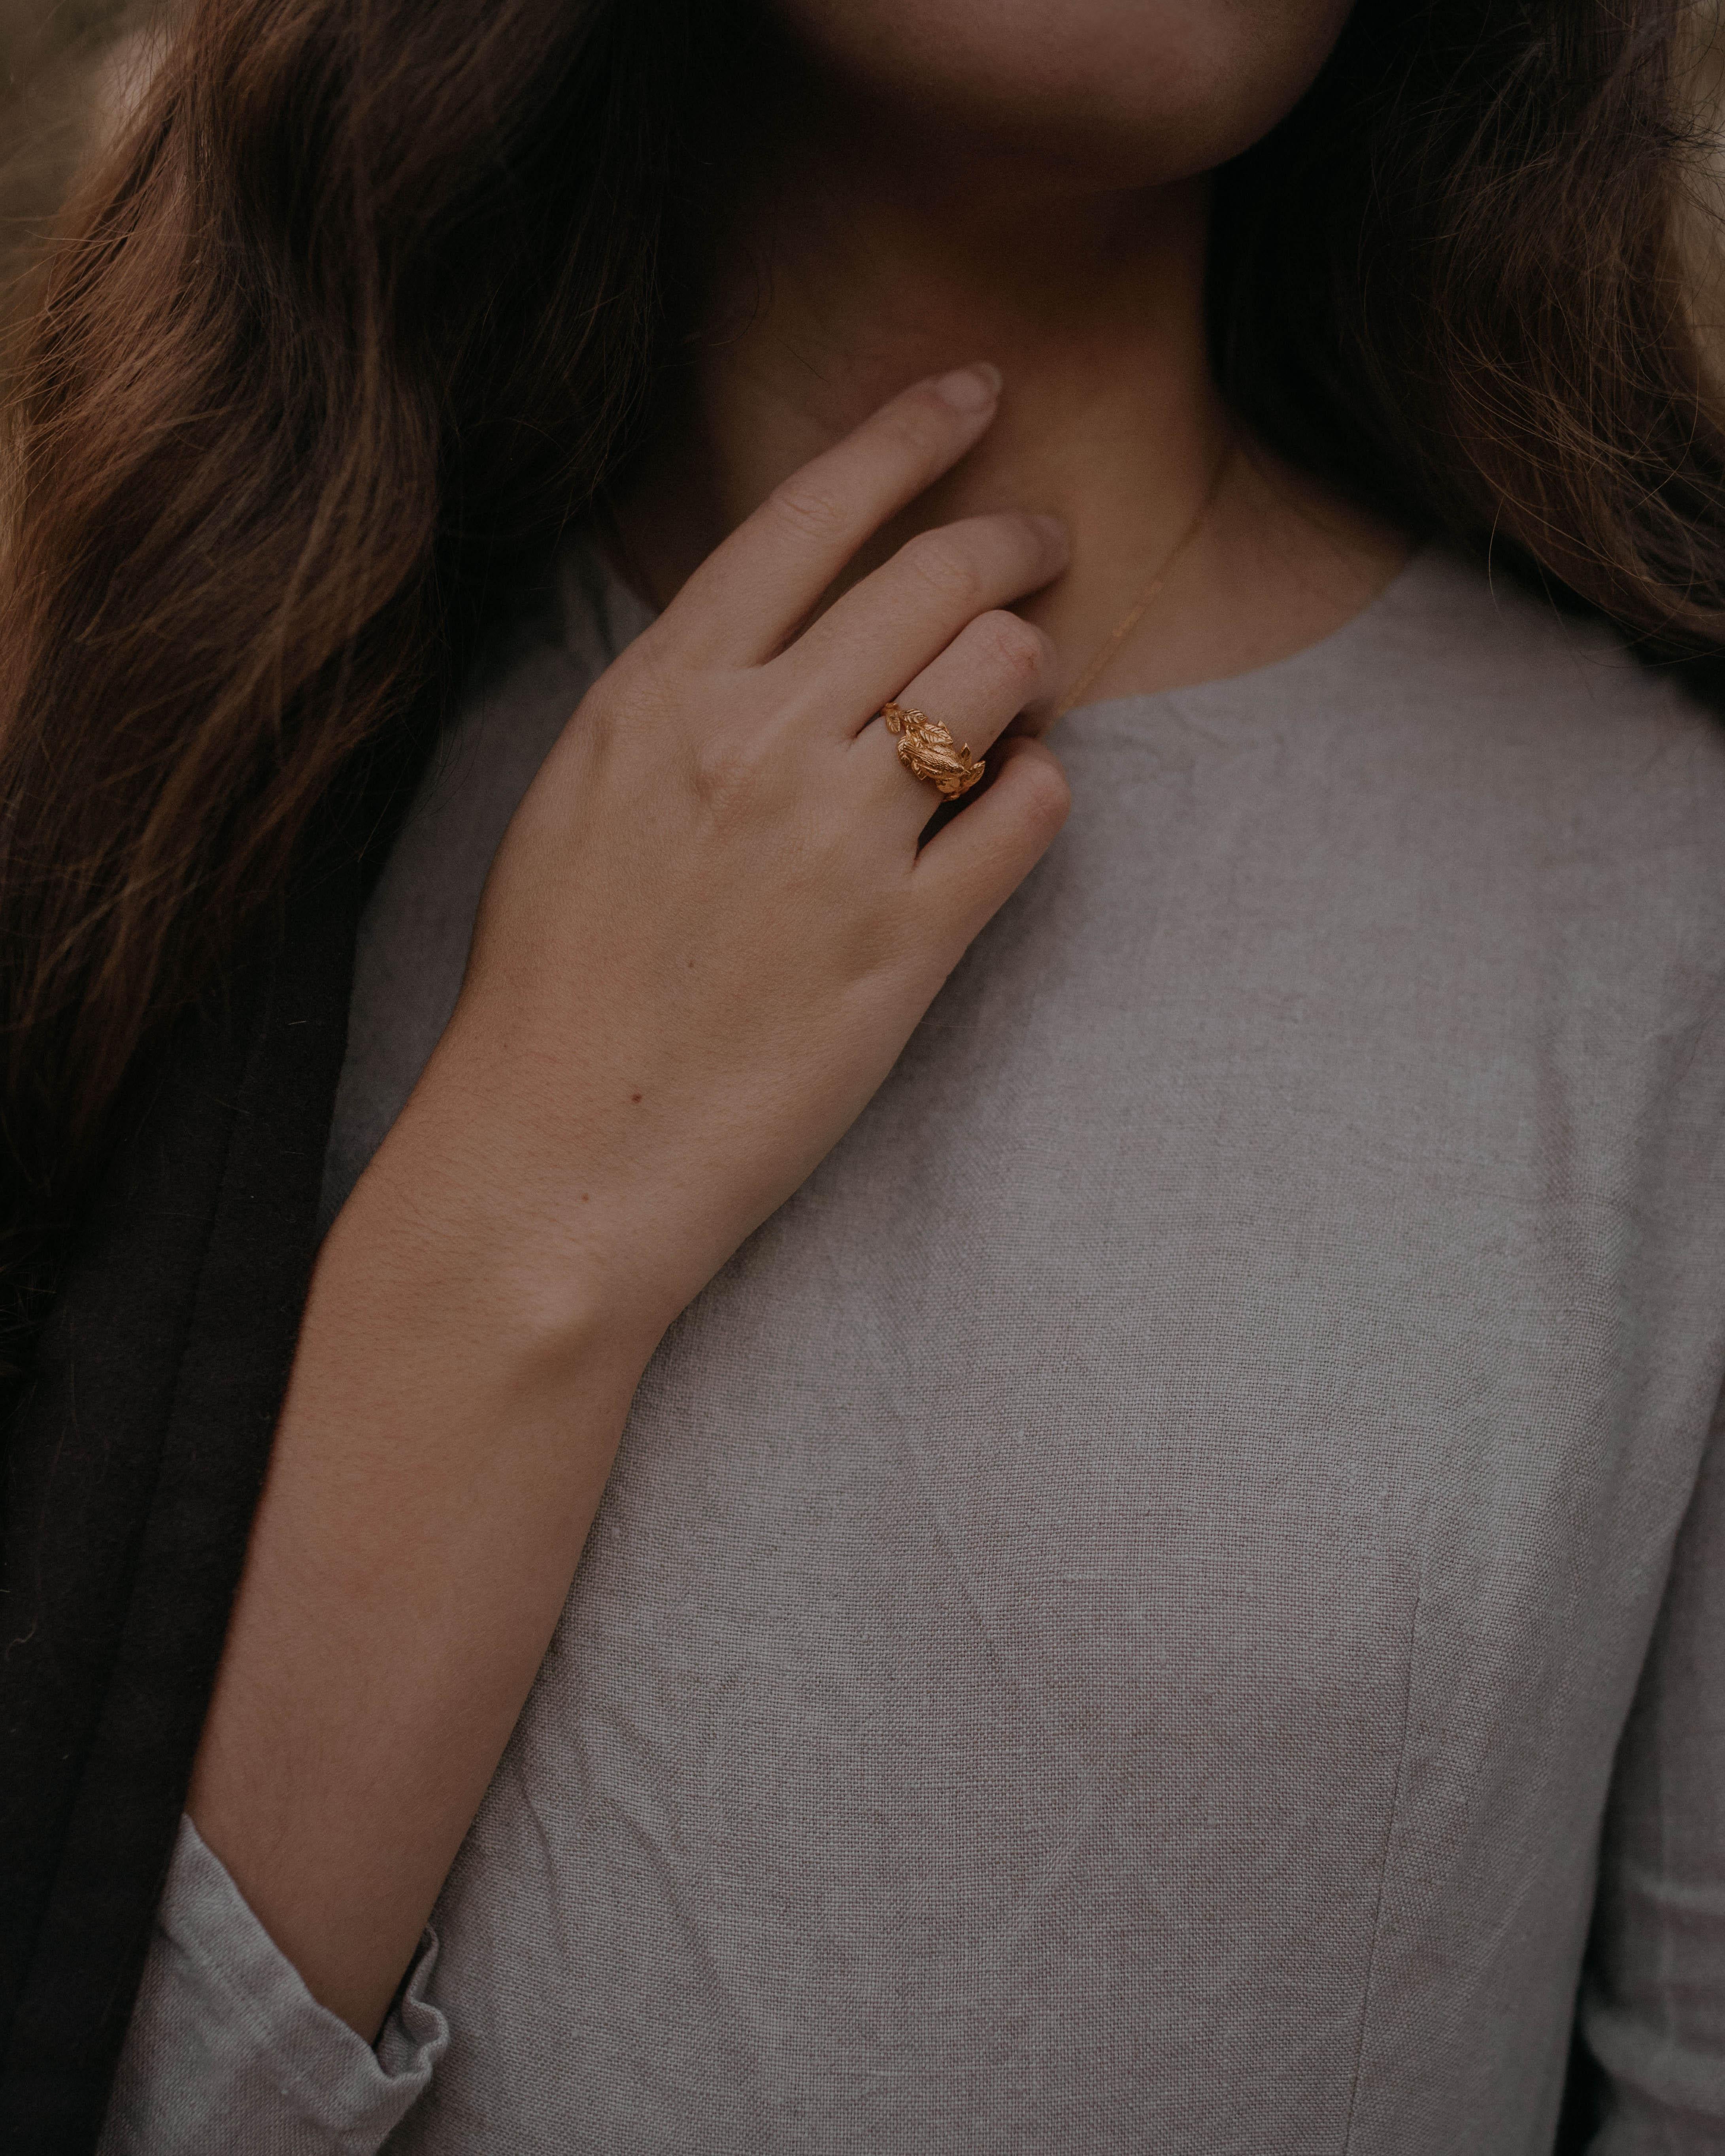 This is a delicate little ring with a branch textured band and a tiny robin perched amongst the leaves. This ring is cast in solid 18 Carat gold and finished by hand, and created from Lucy's original hand-sculpted design. 

This piece is made in